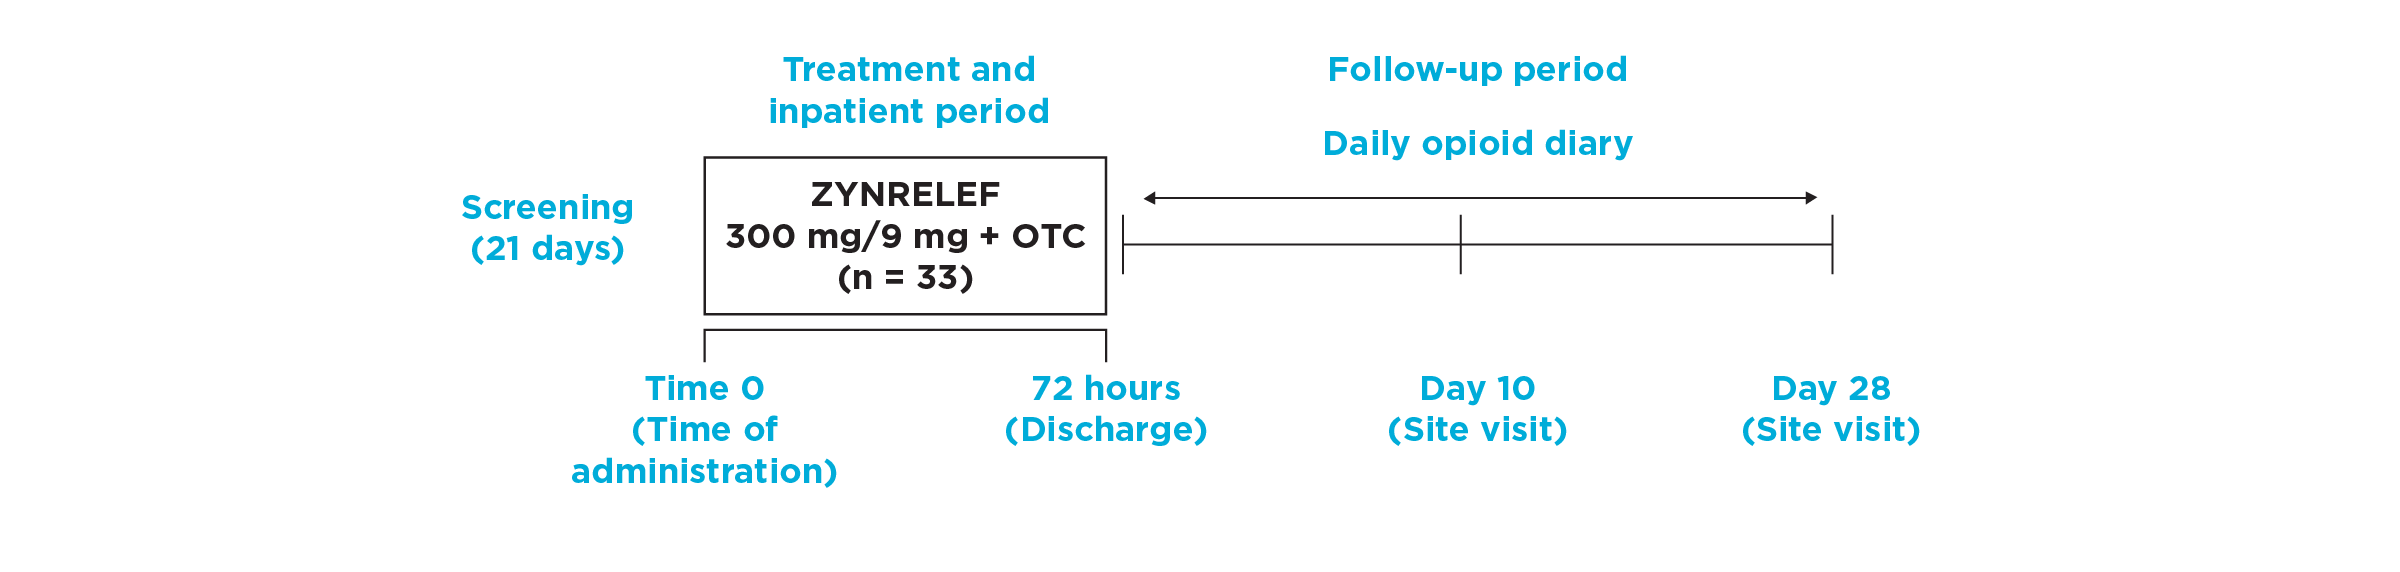 Timeline overview of EPOCH 2 Single-Arm Follow-On study design from screening through follow up.